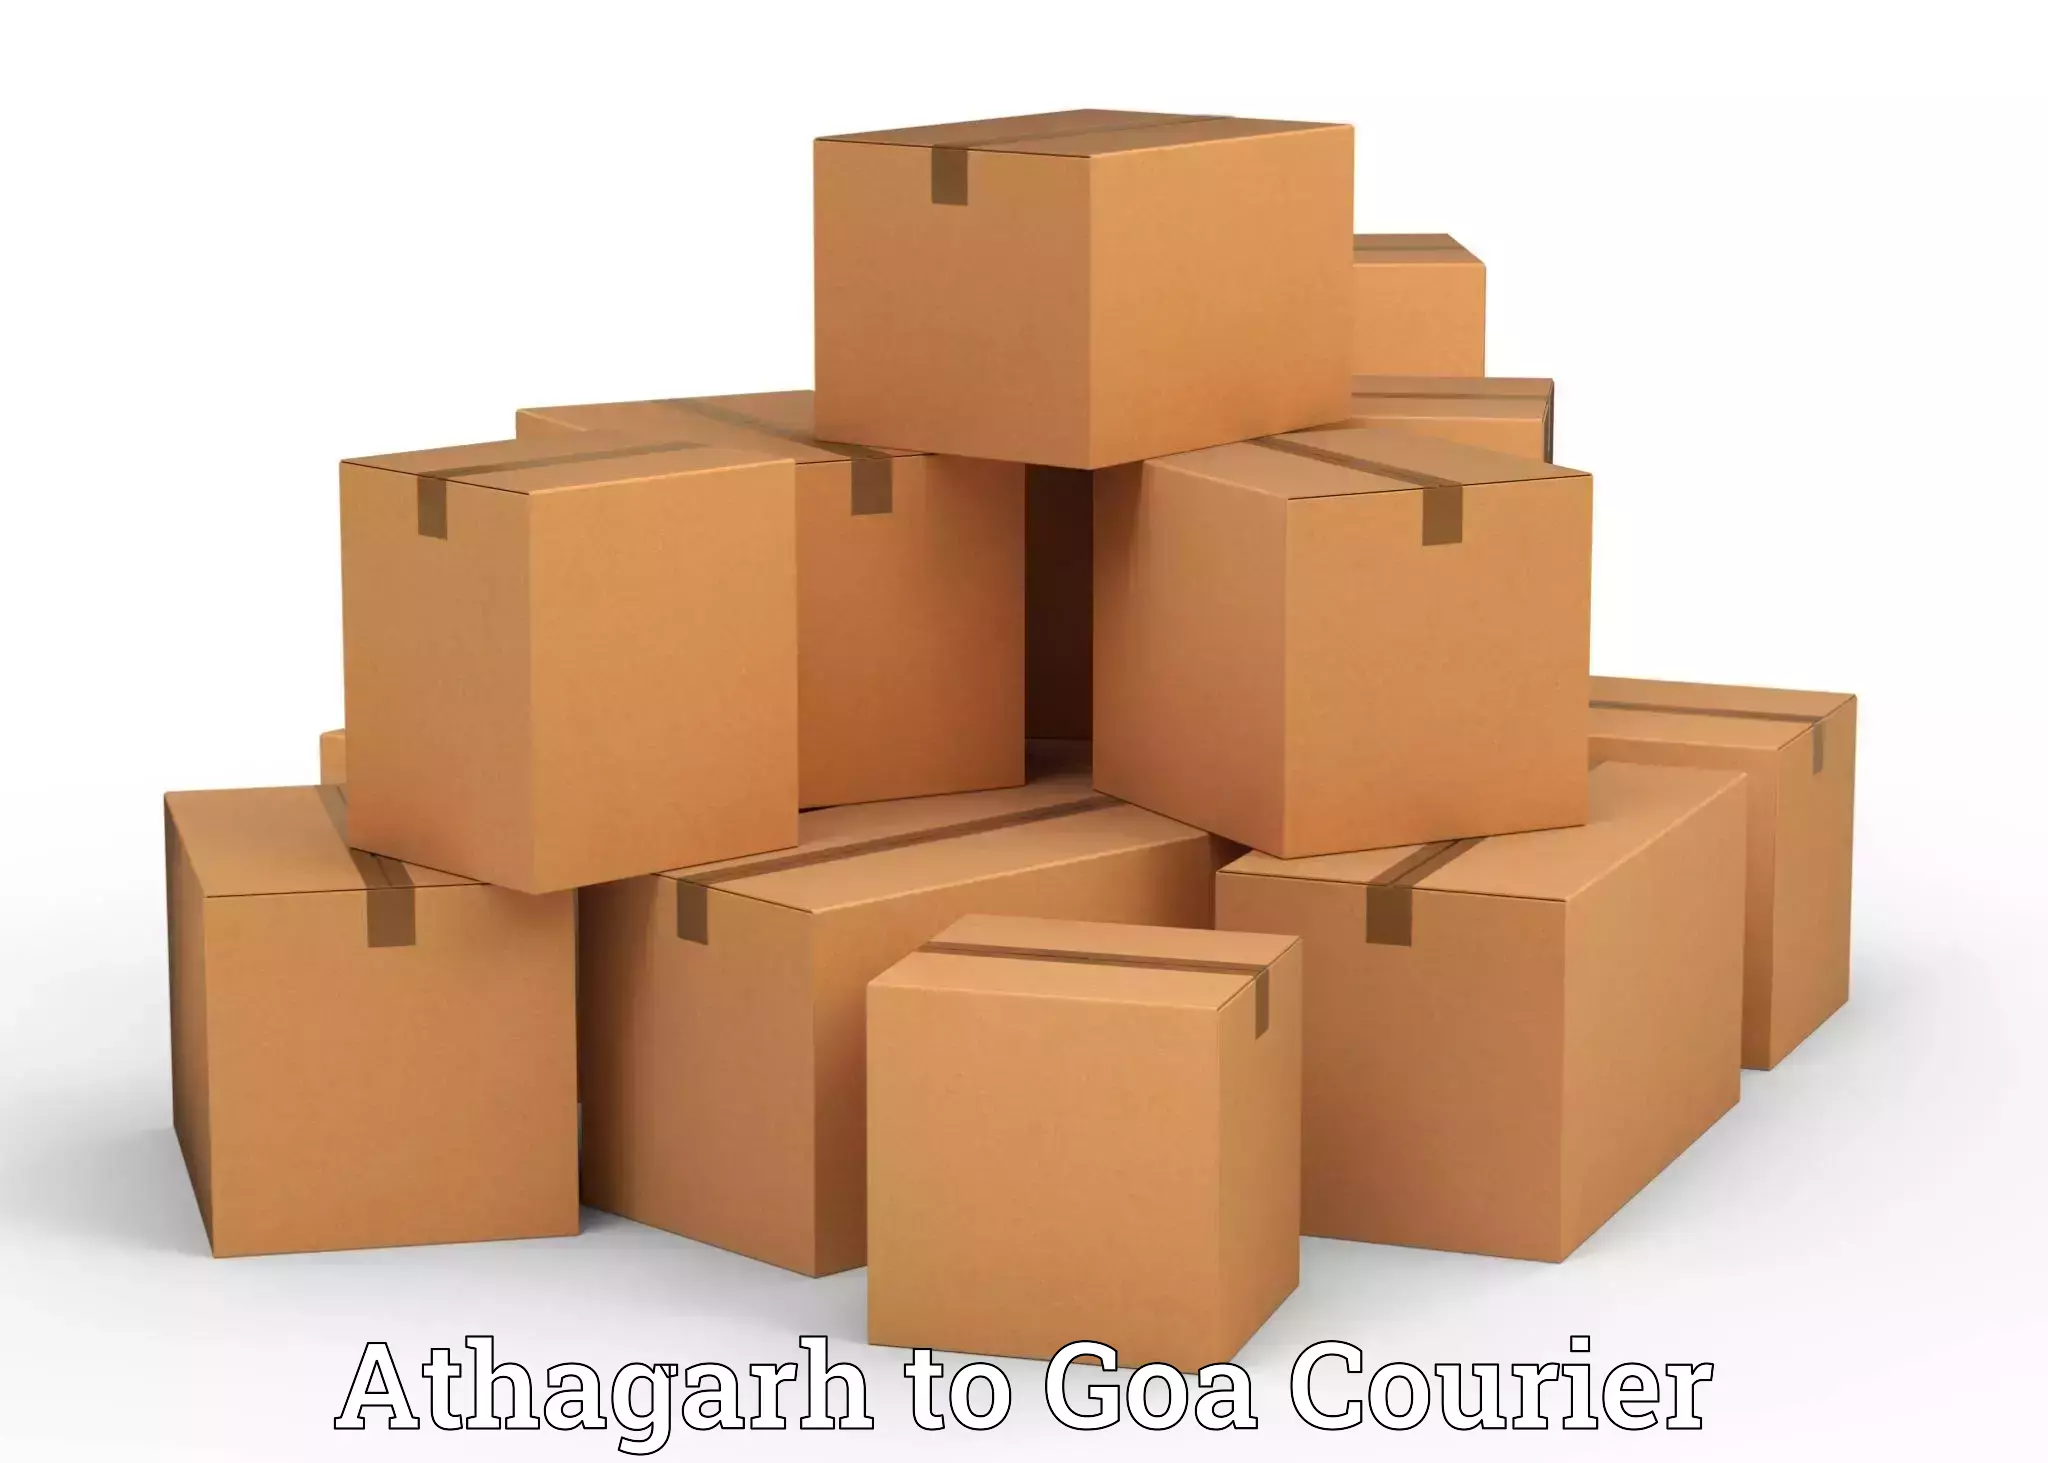 Efficient packing and moving Athagarh to Panaji